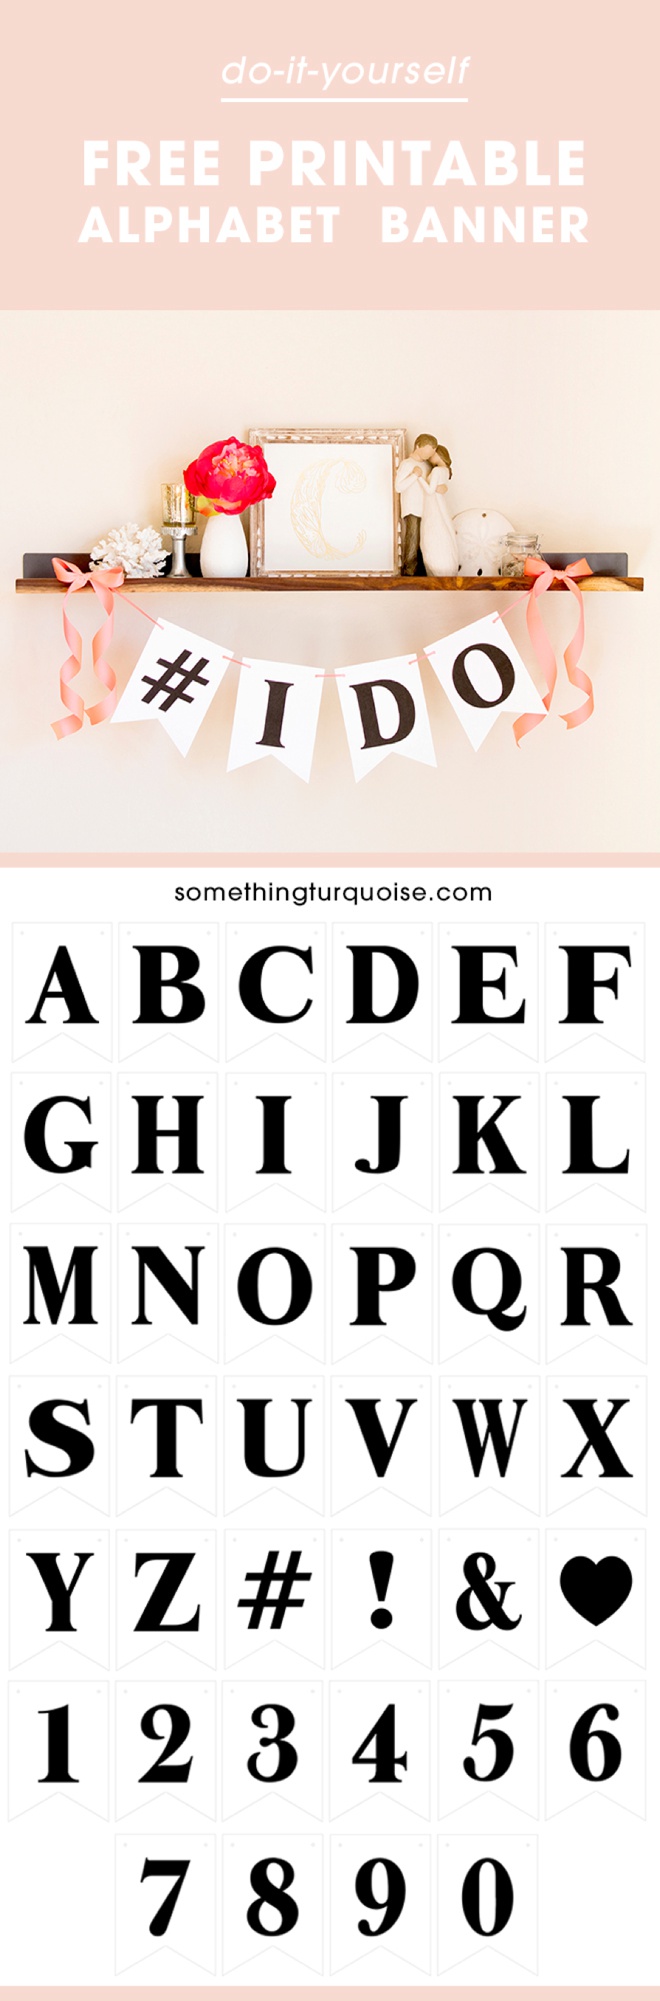 FREE Printable Alphabet and Number Banner! Adorable! With Free Letter Templates For Banners